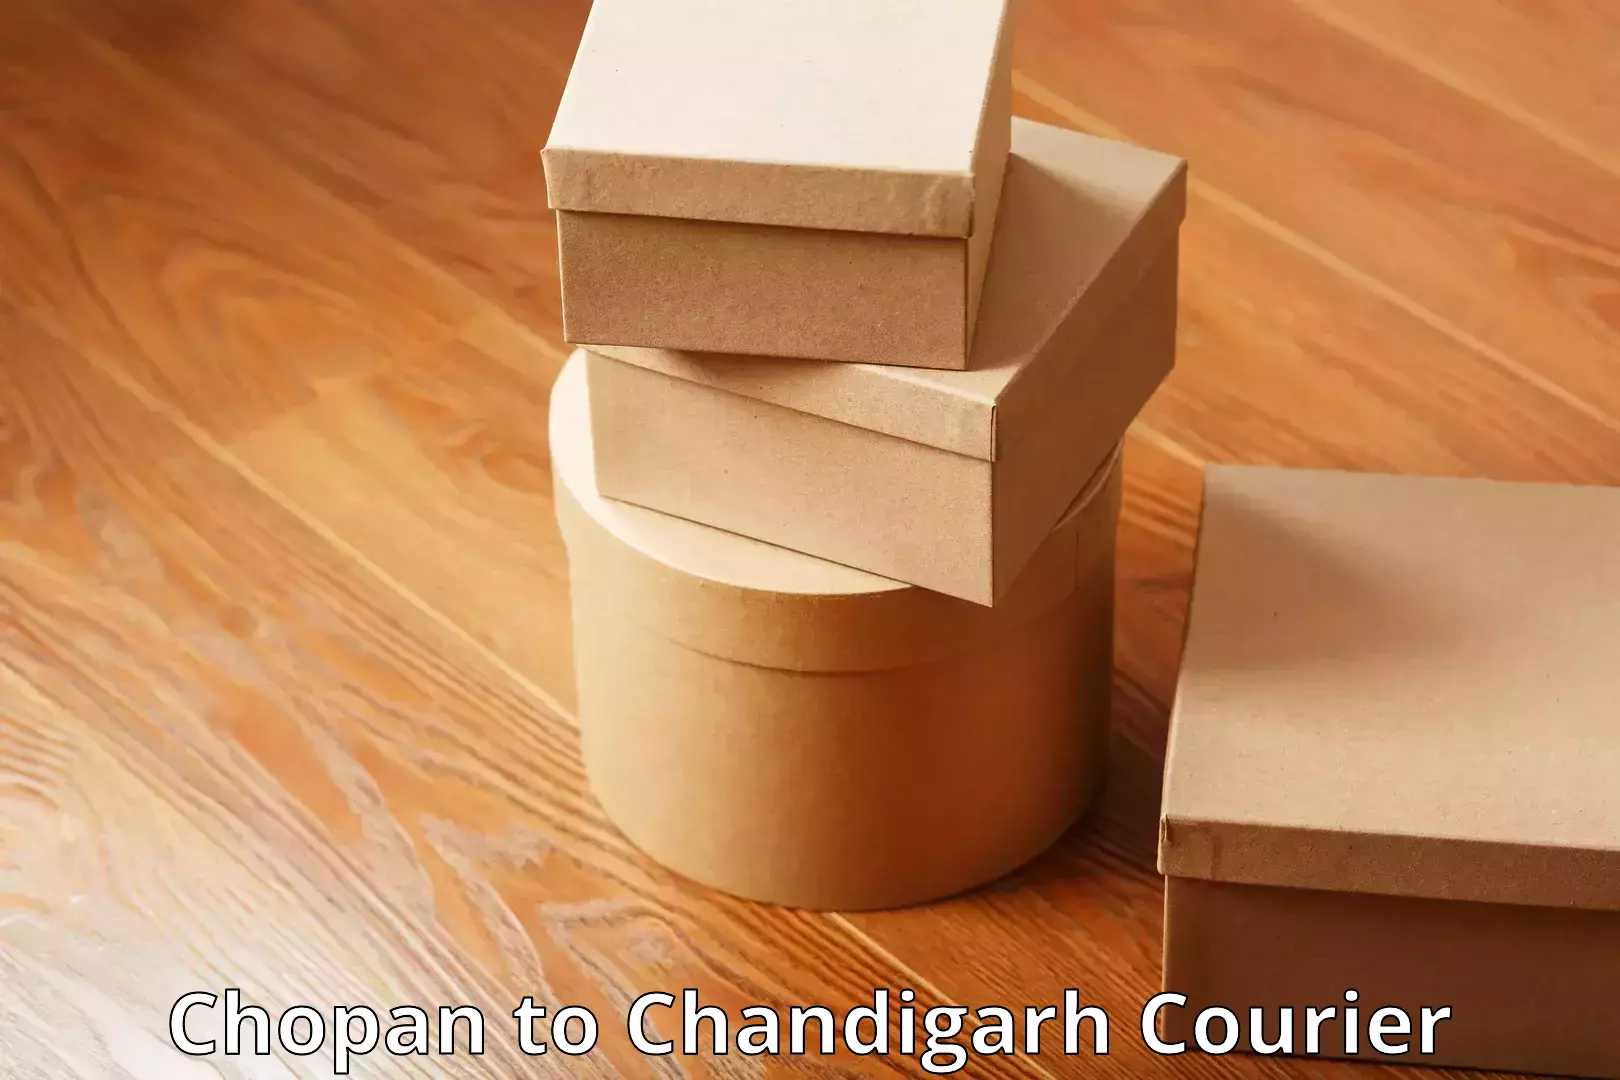 Luggage transport consulting Chopan to Chandigarh